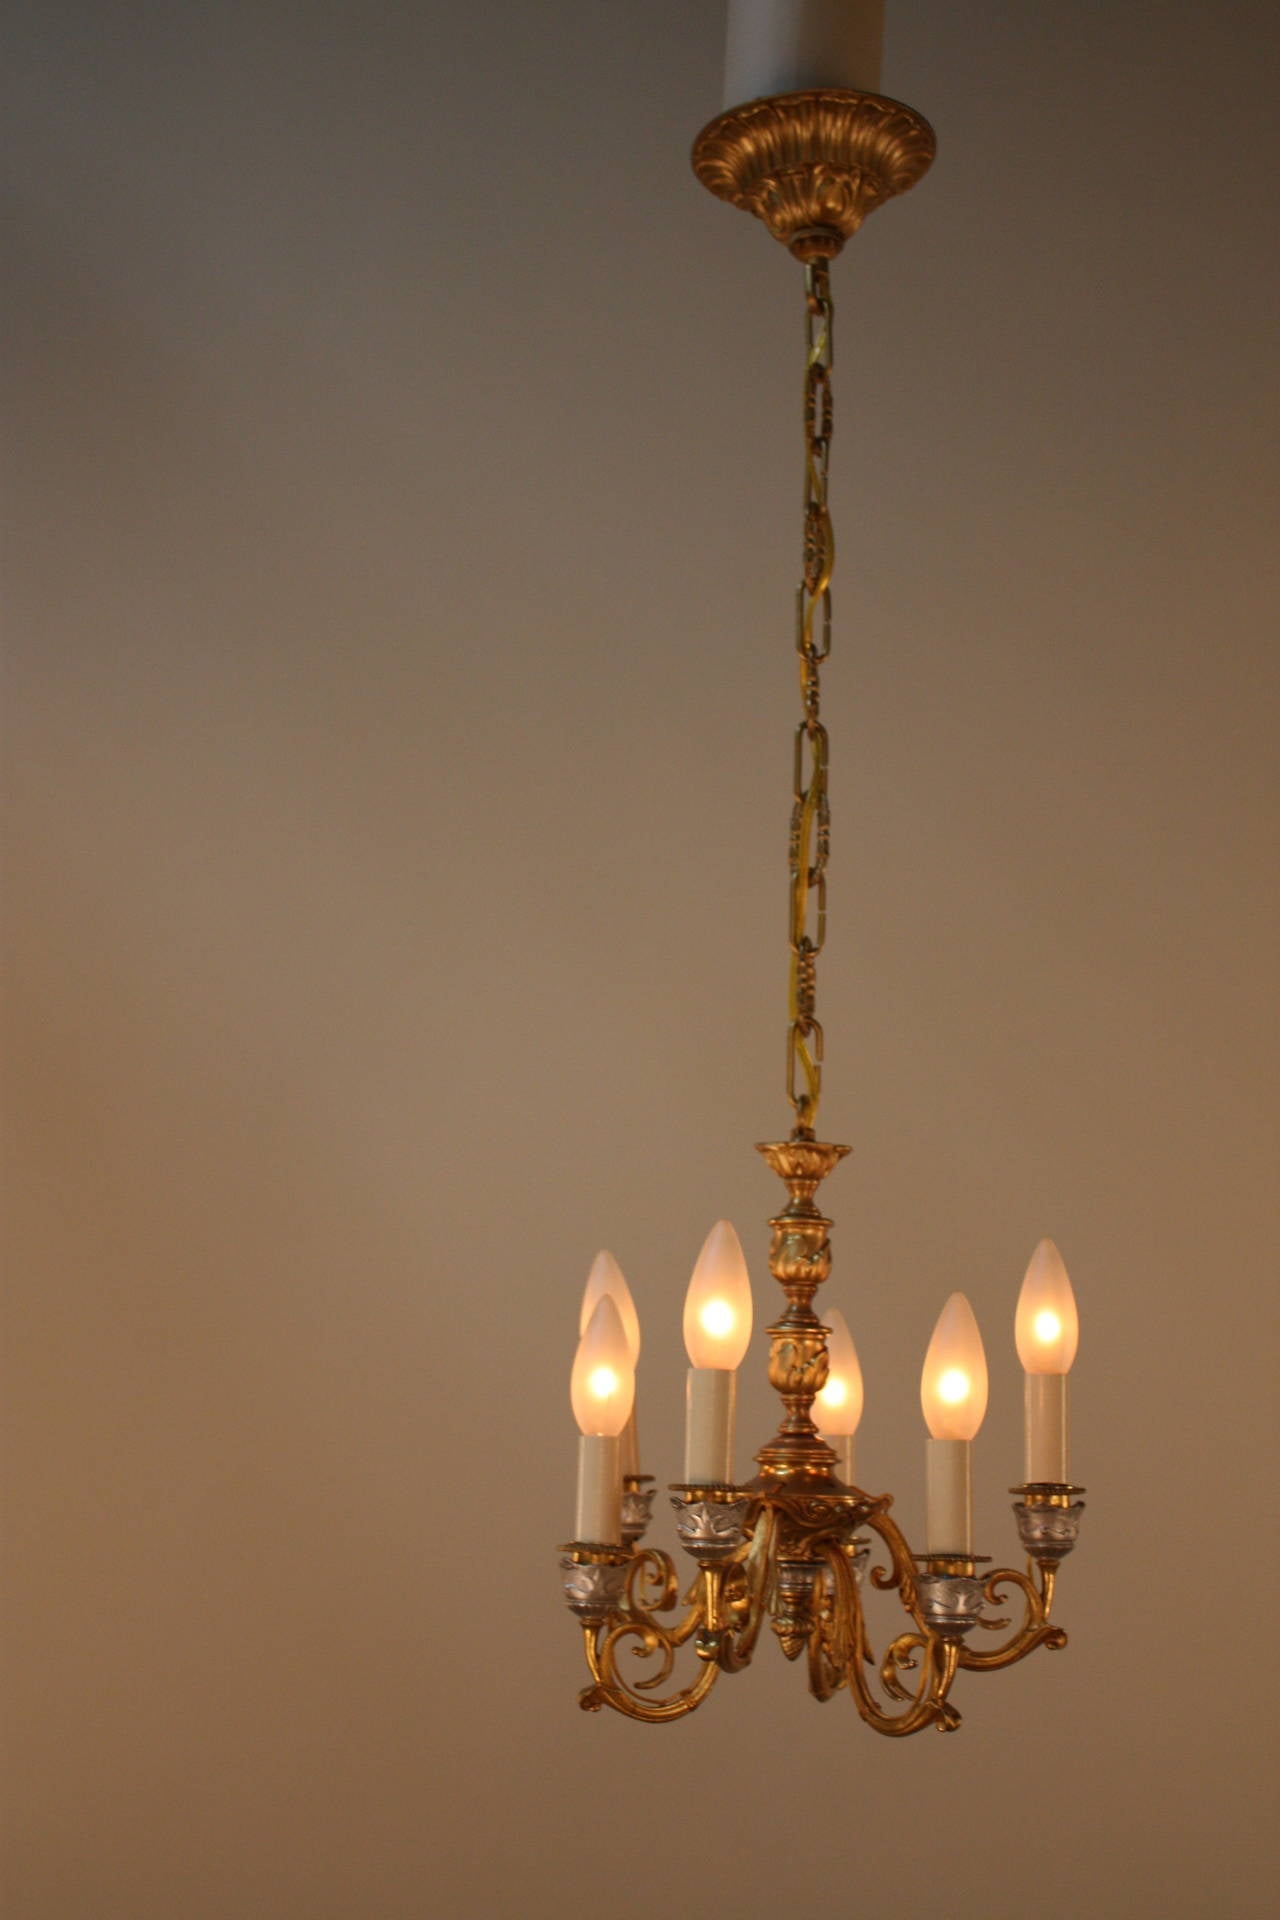 Pair of electrified six-light 19th century chandeliers in gold and silver over bronze.